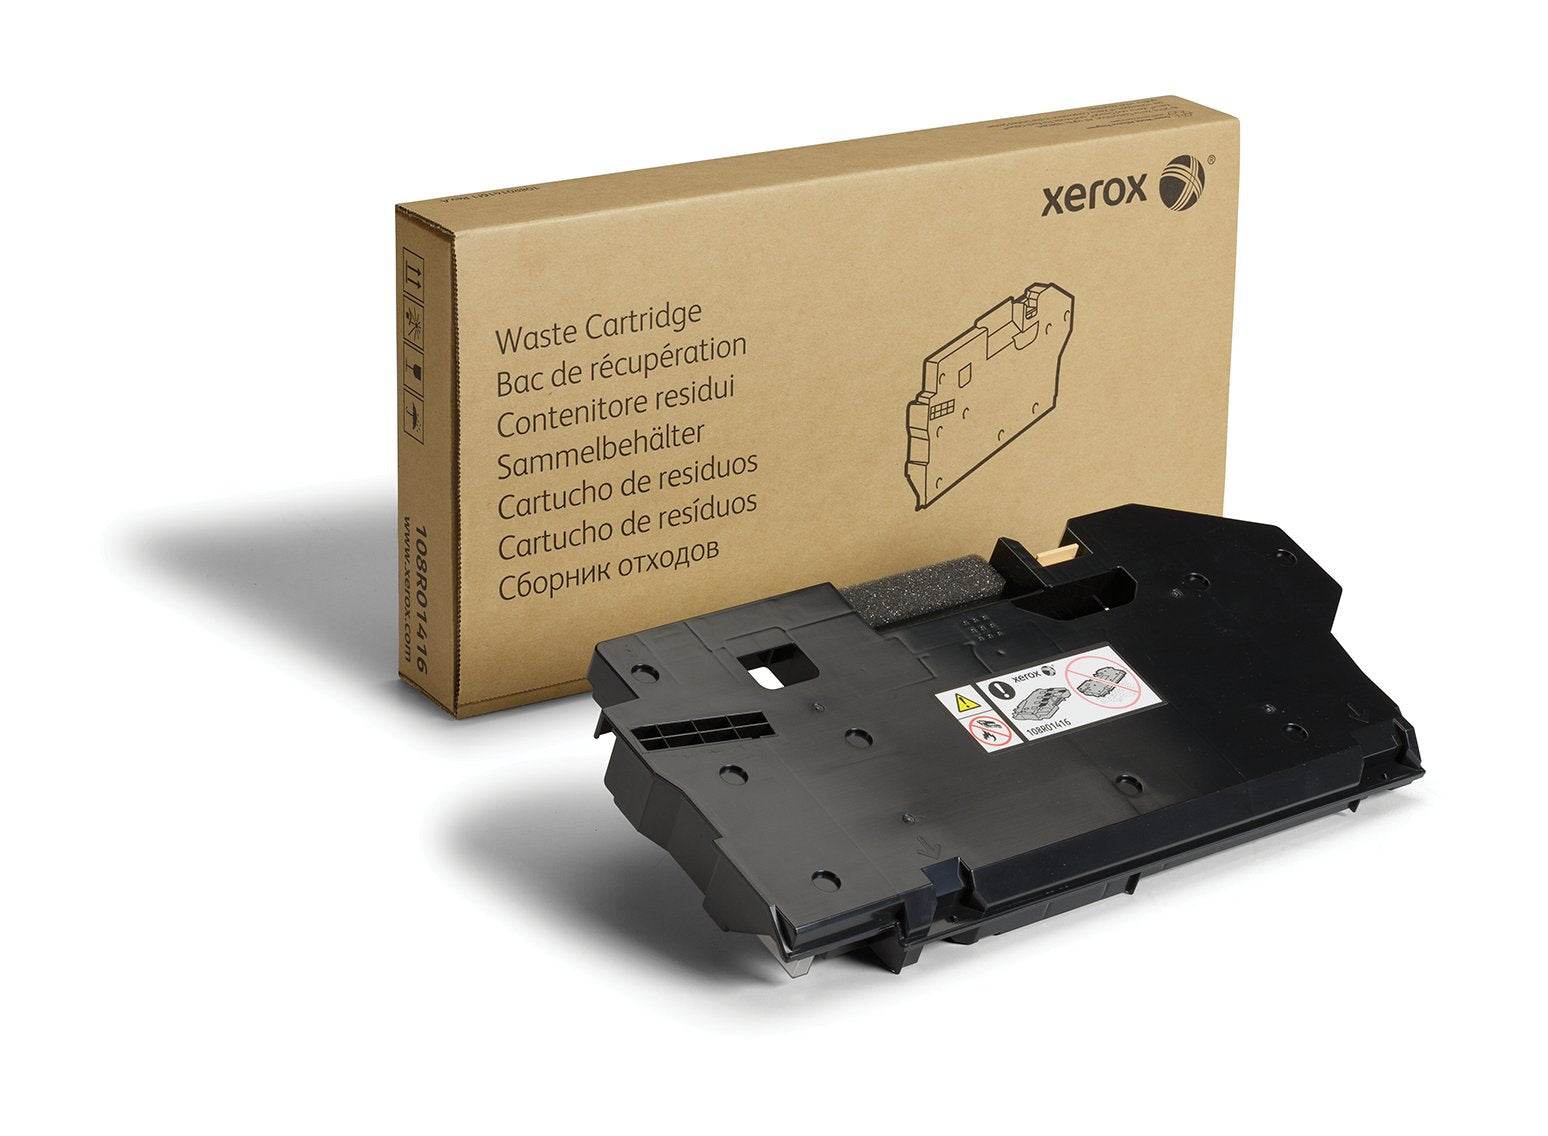 Xerox 108R01416 Genuine Waste Toner Cartridge for WorkCentre 6510 and 6515 - 30,000 Page Yield